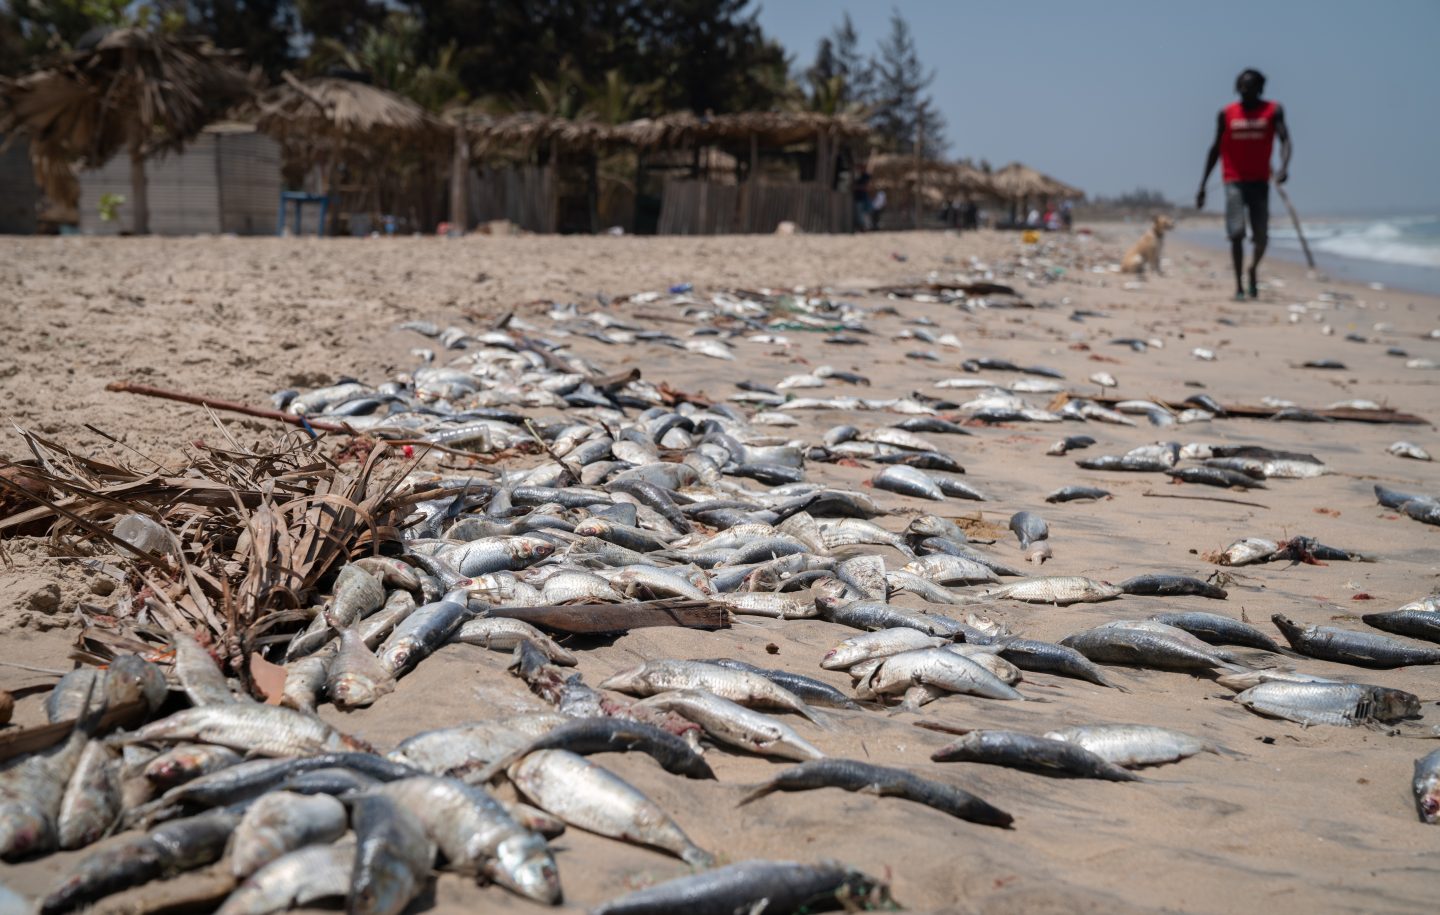 Dead fish dumped on Sanyang beach, food security in the Gambia